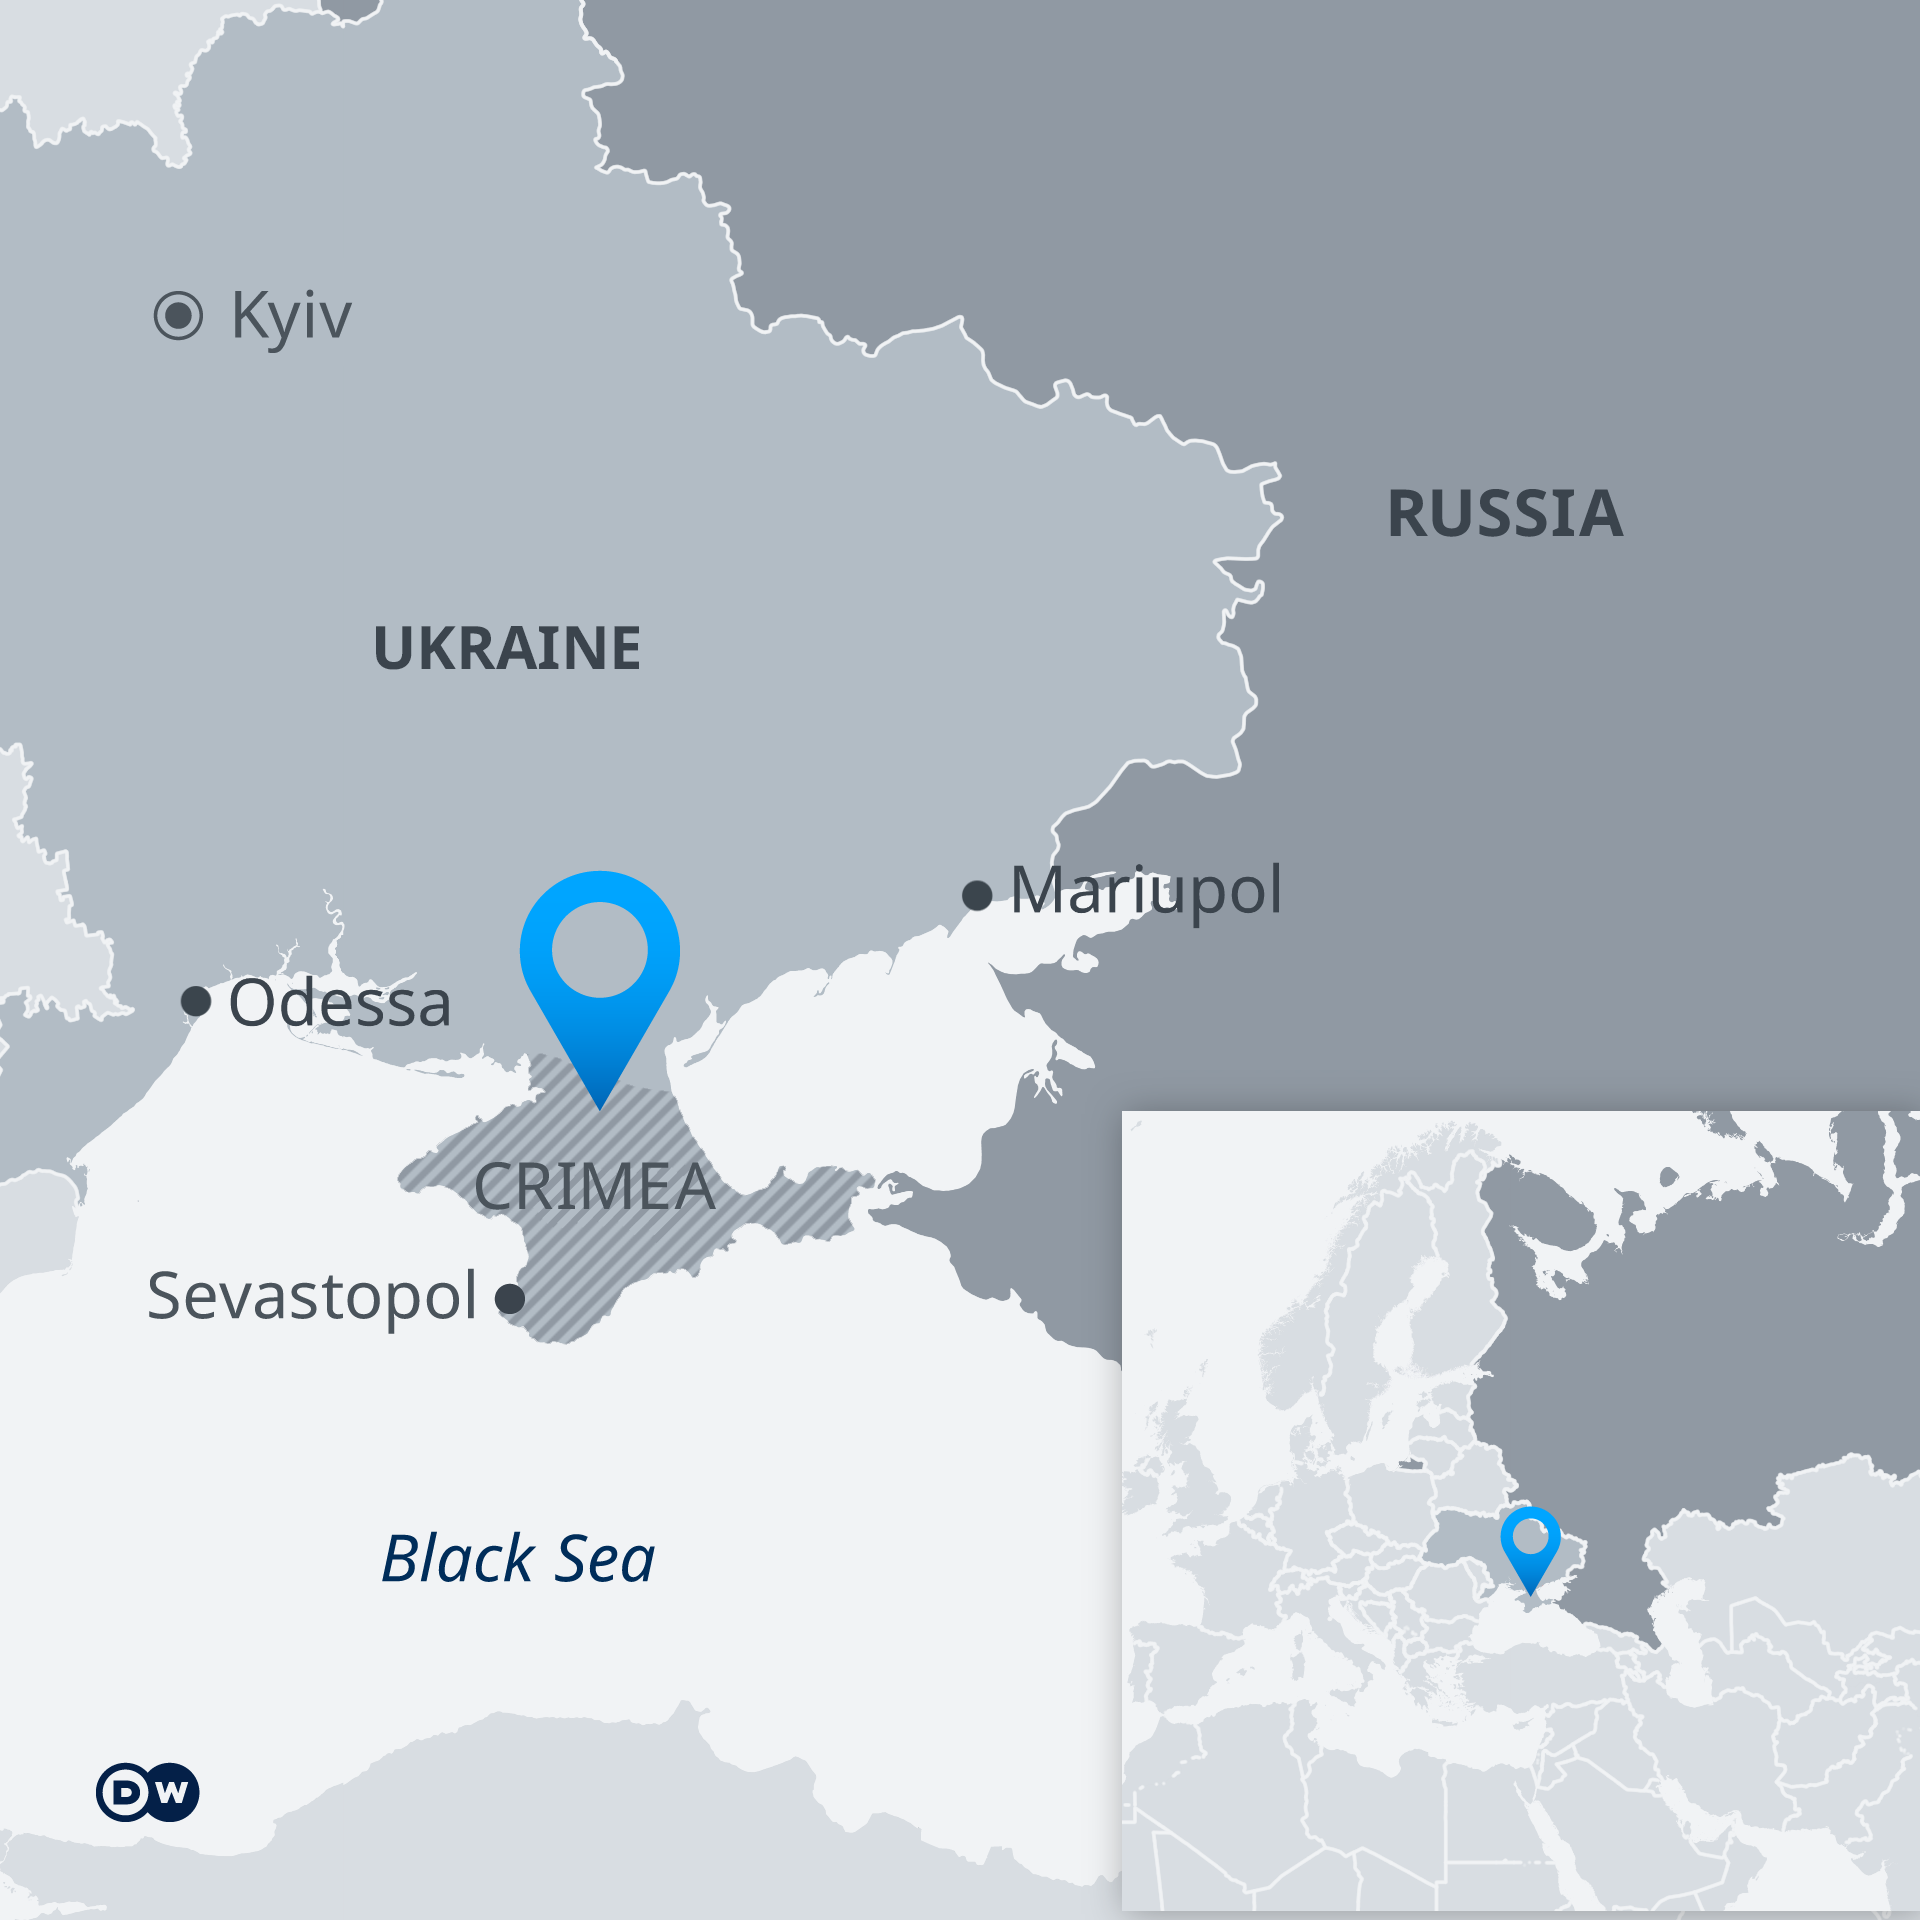 A map of Ukraine and Russia, featuring Crimea as a separate territory